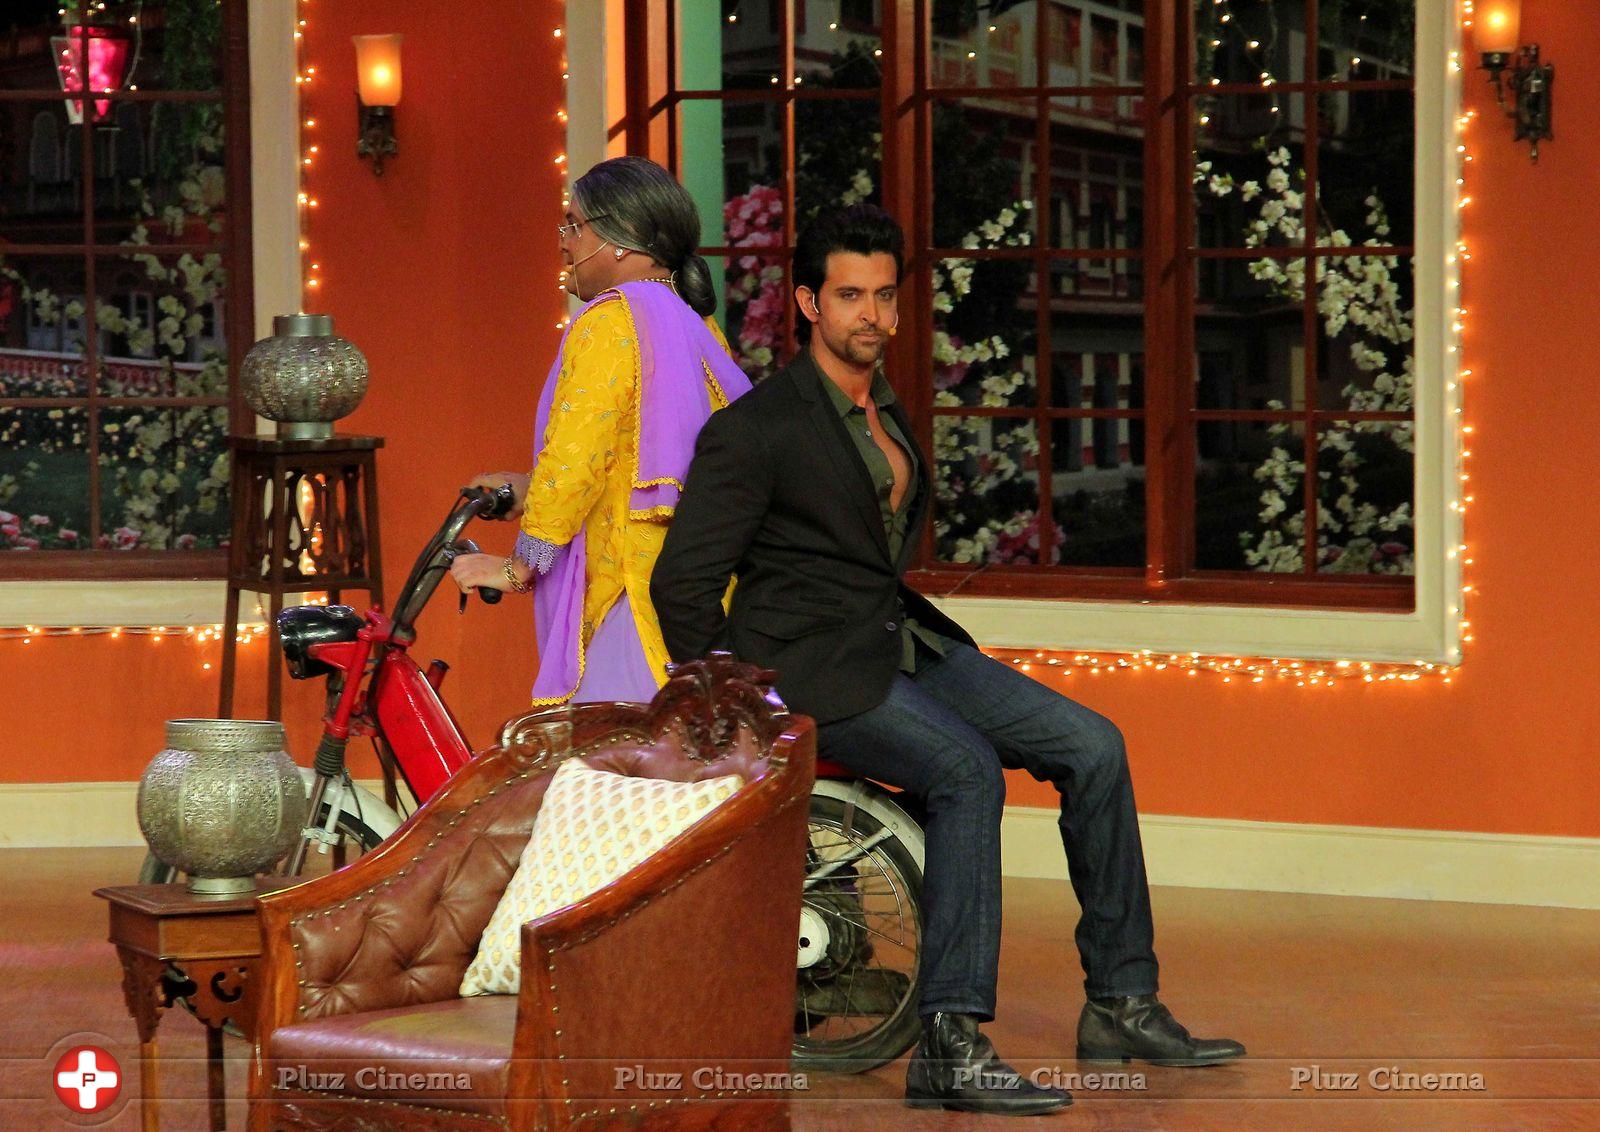 Hrithik Roshan - Hrithik Roshan Promotes Krrish 3 On the Sets Of Comedy Nights With Kapil Photos | Picture 611804